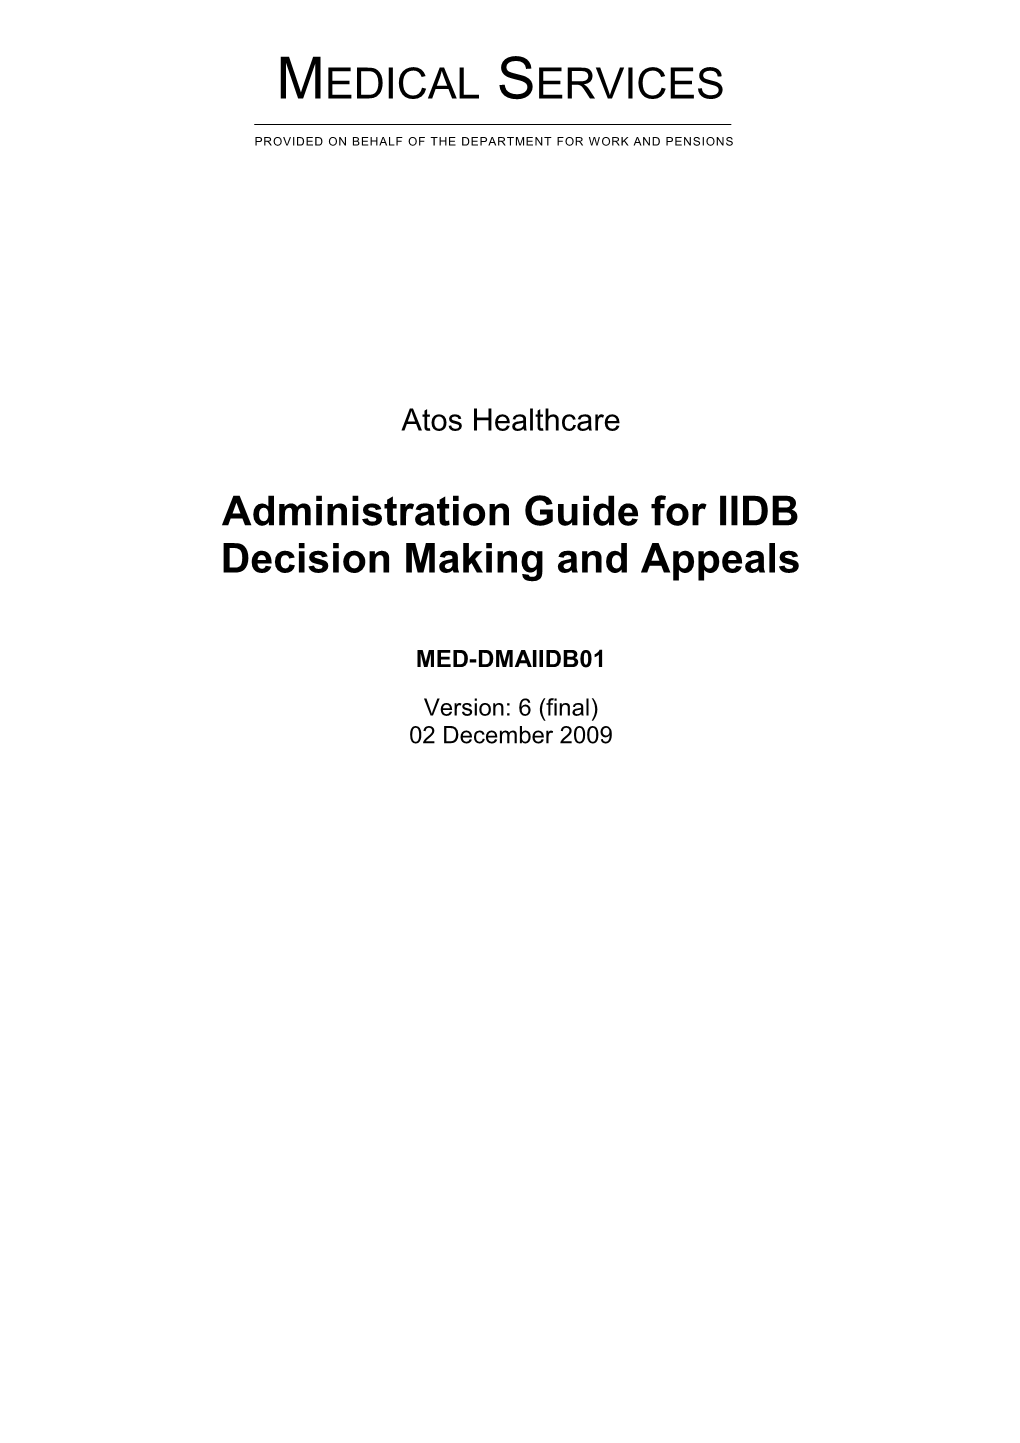 Administration Guide for IIDB Decision Making and Appeals